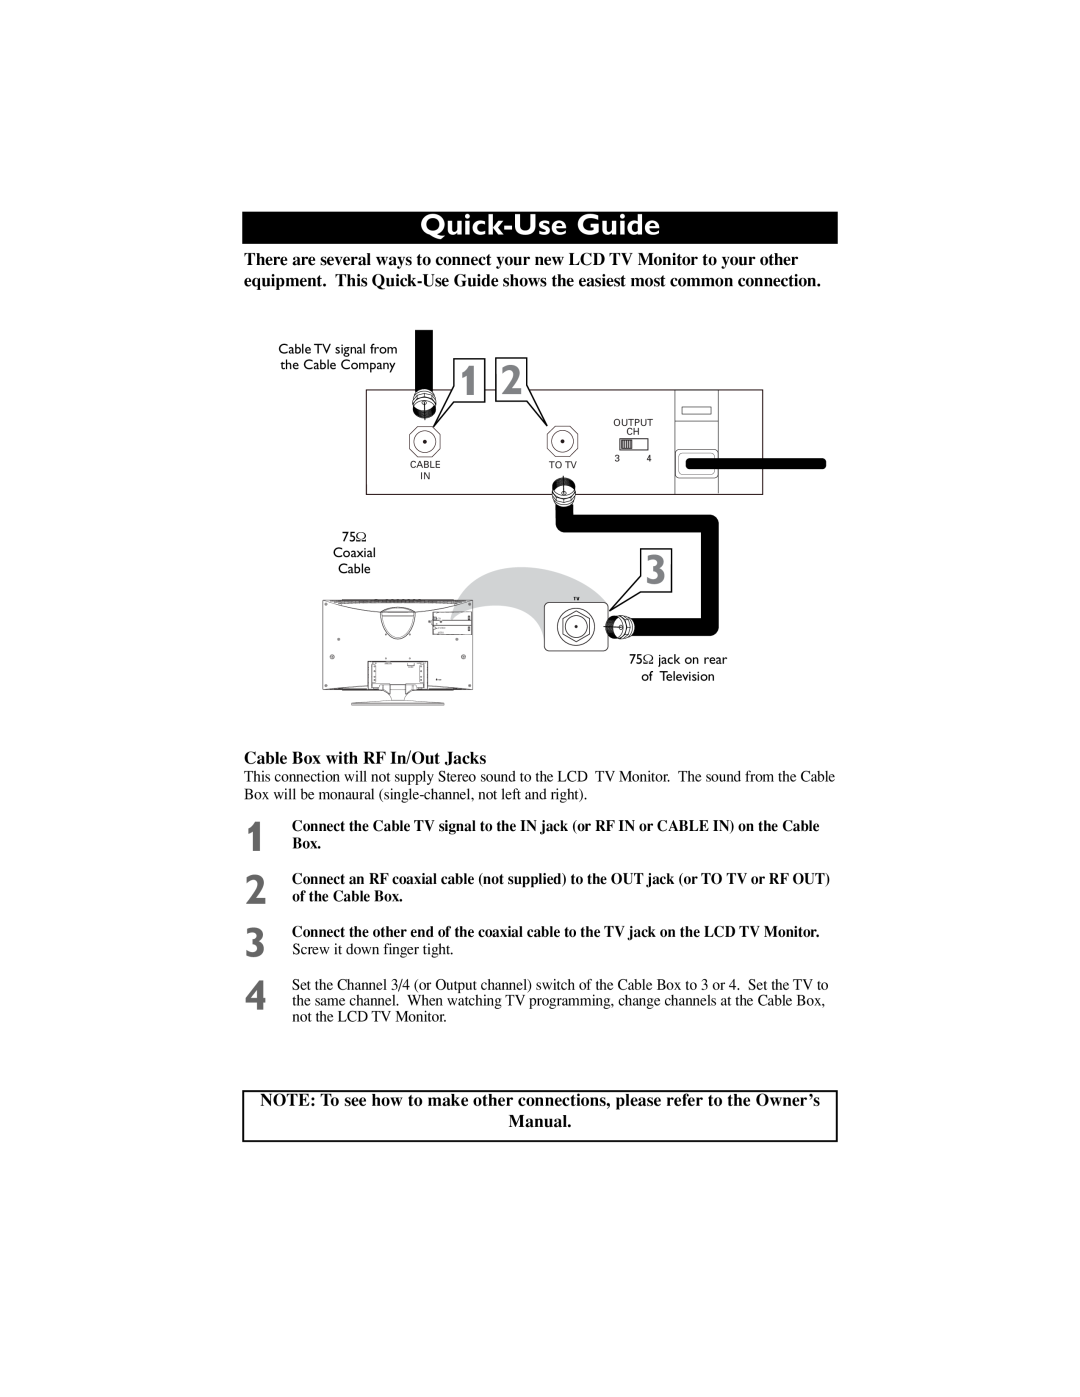 Sony 170S7 owner manual Quick-Use Guide, Cable Box with RF In/Out Jacks, Manual 